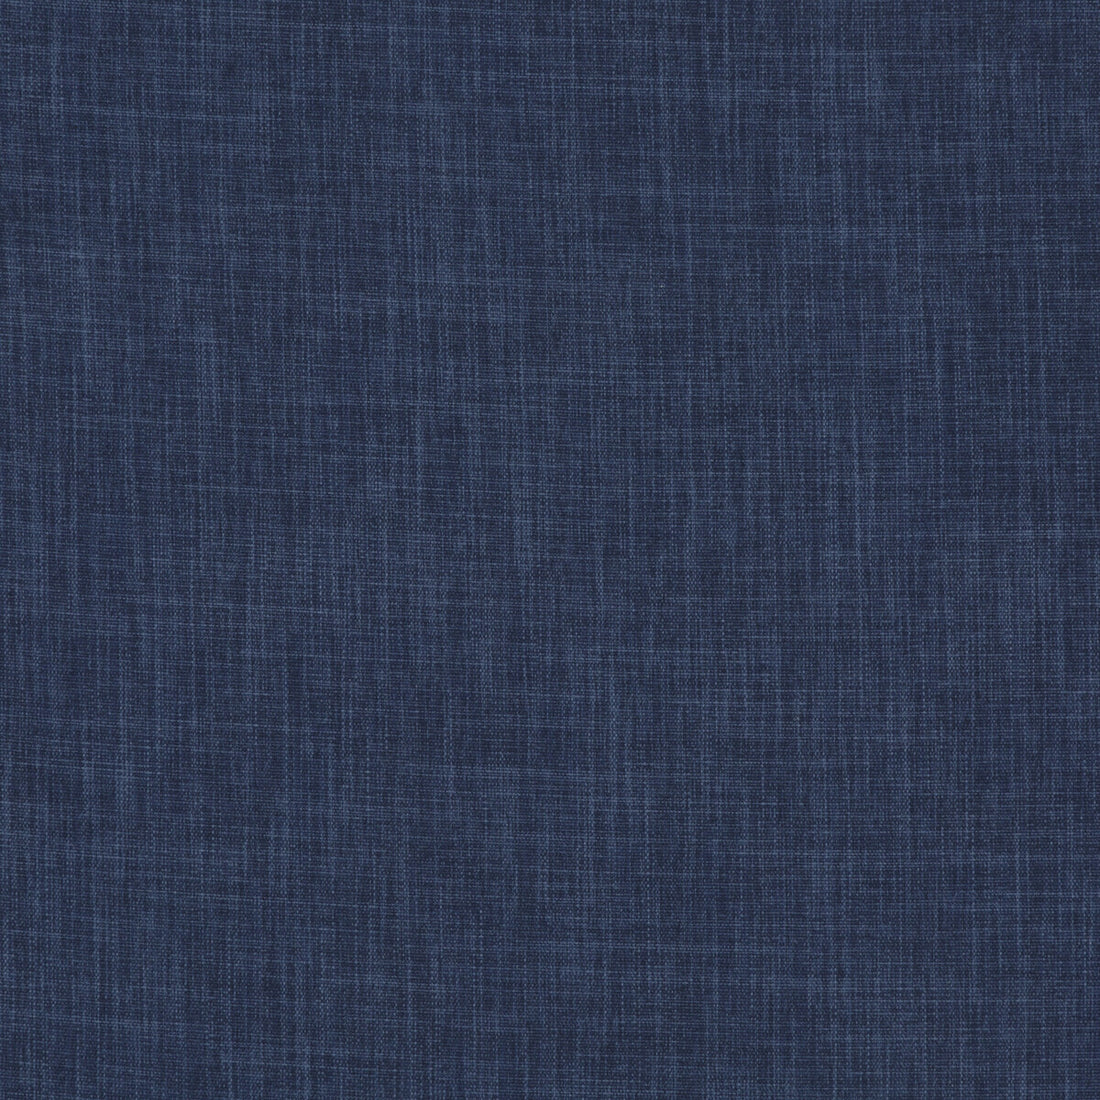 Fernshaw fabric in indigo color - pattern PF50410.680.0 - by Baker Lifestyle in the Notebooks collection